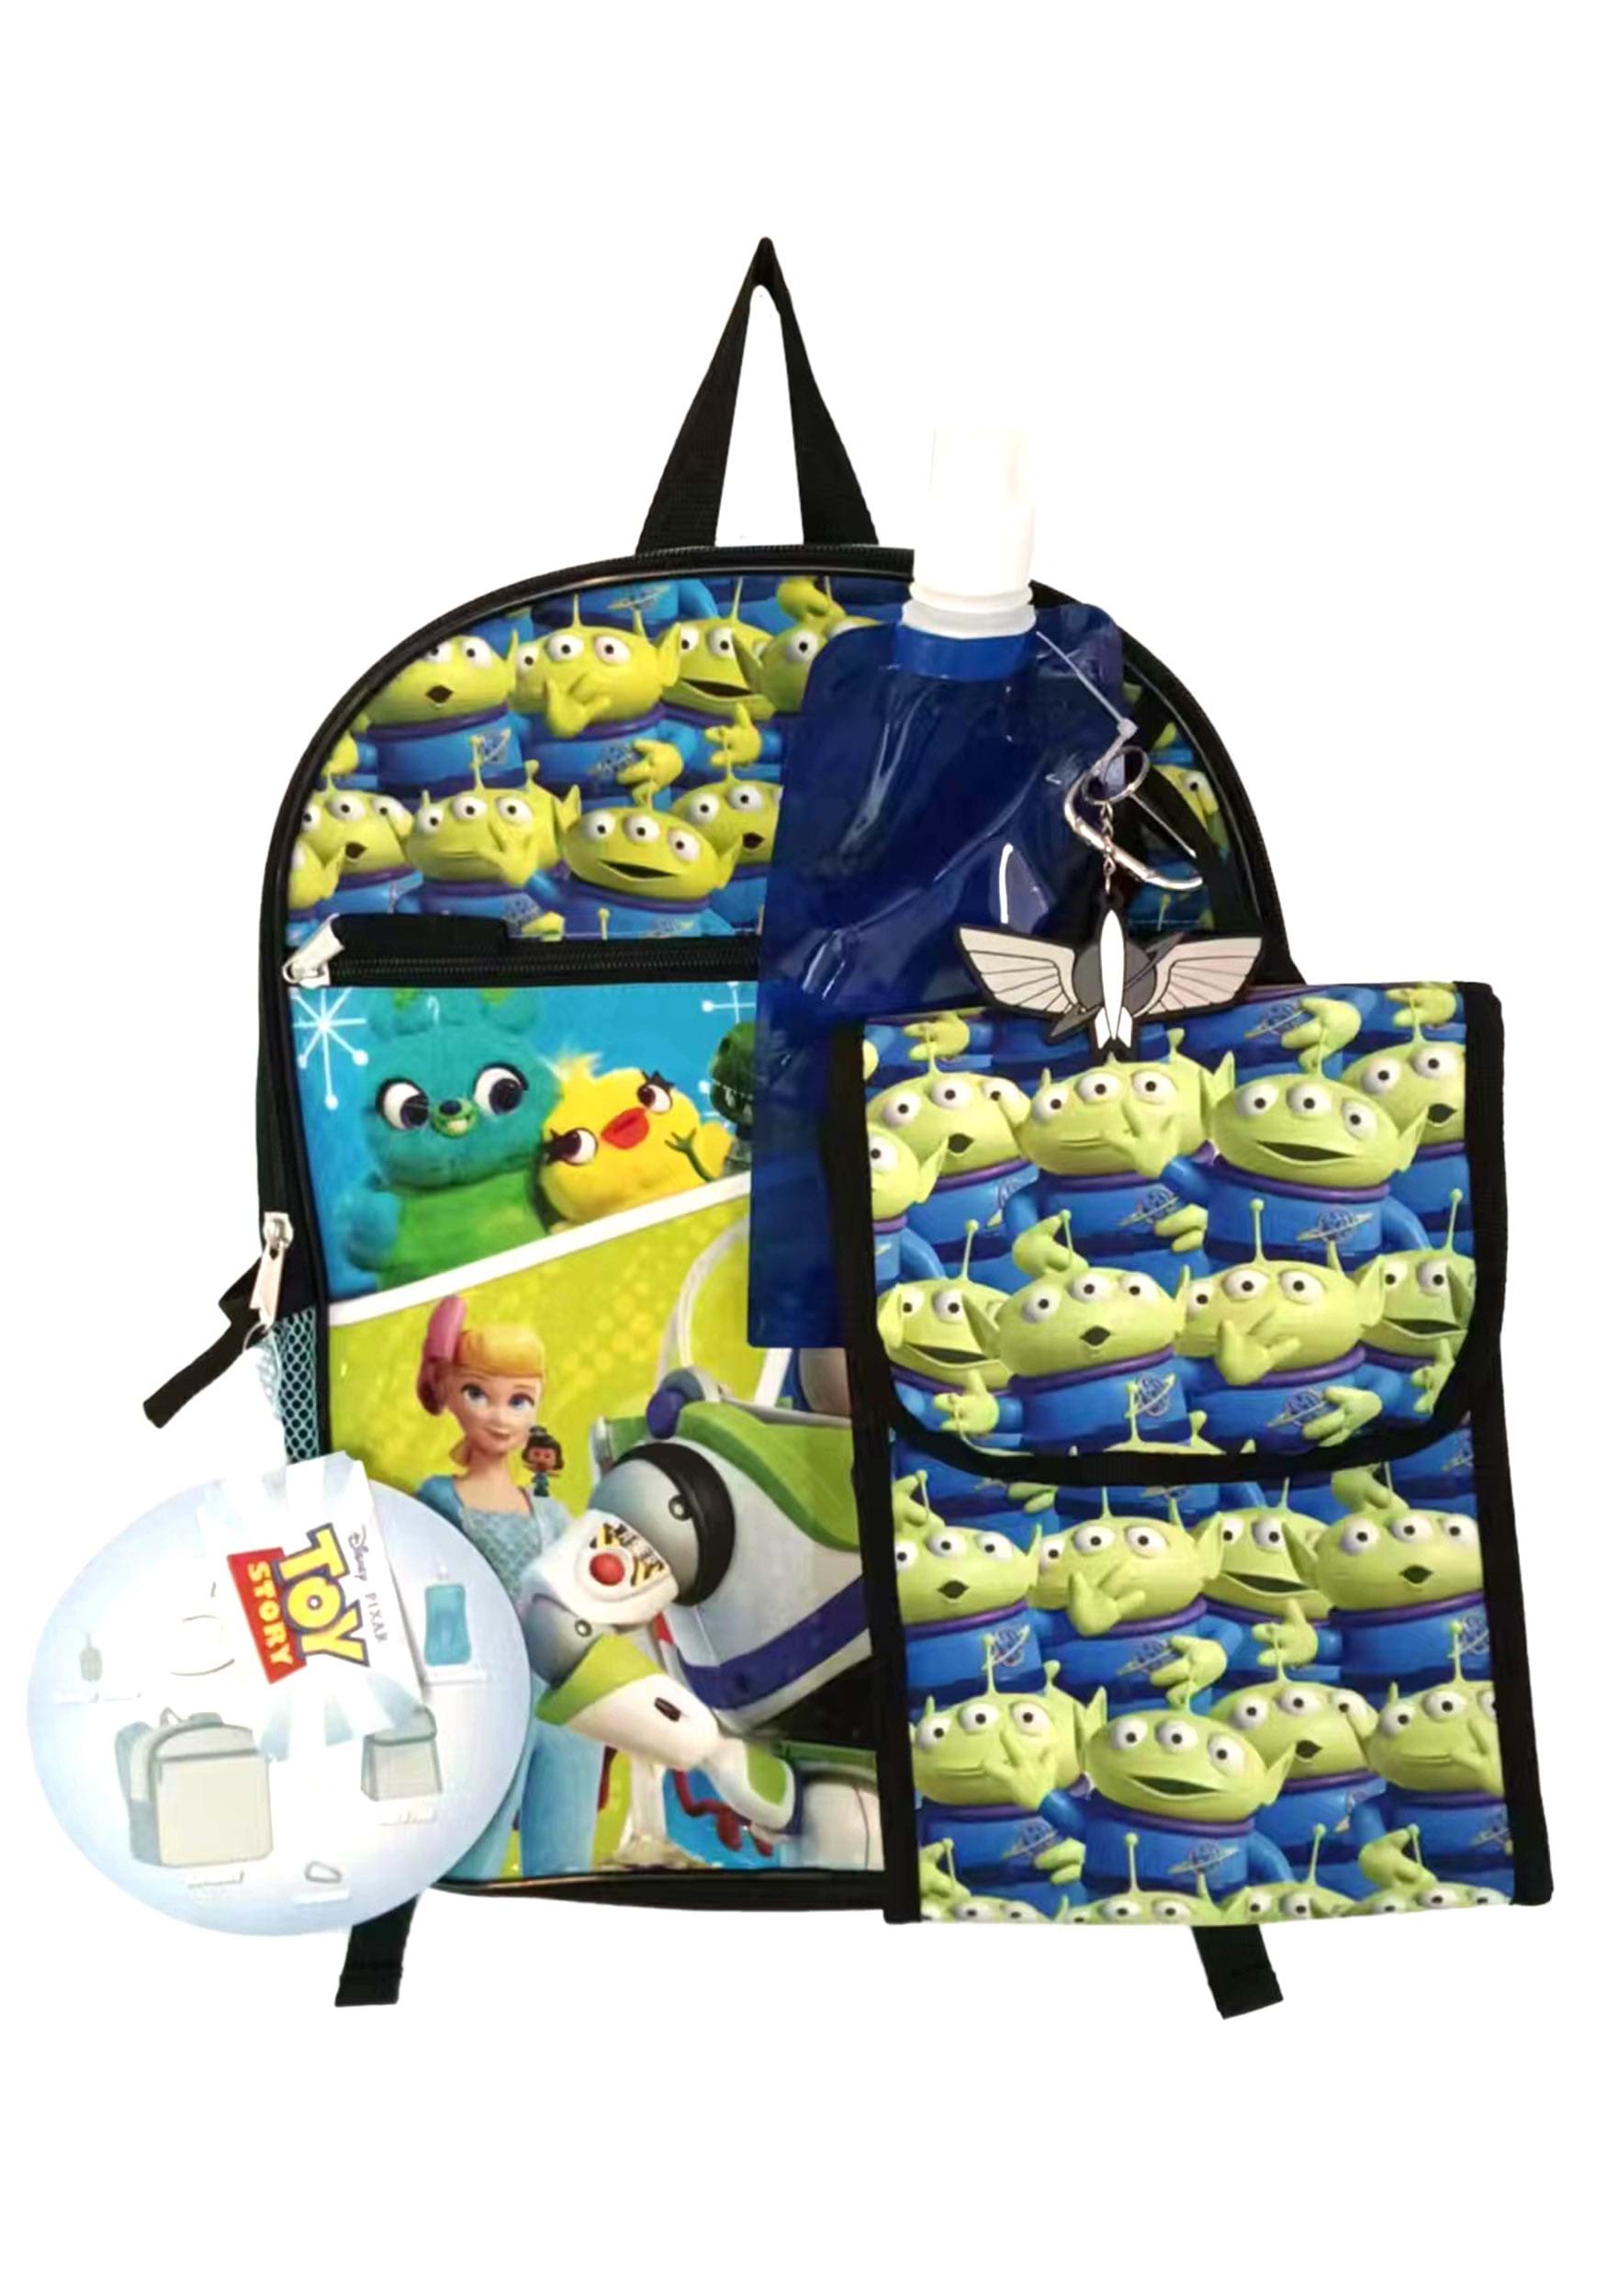 https://images.fun.com/products/89768/1-1/toy-story-5-piece-large-backpack-set.jpg